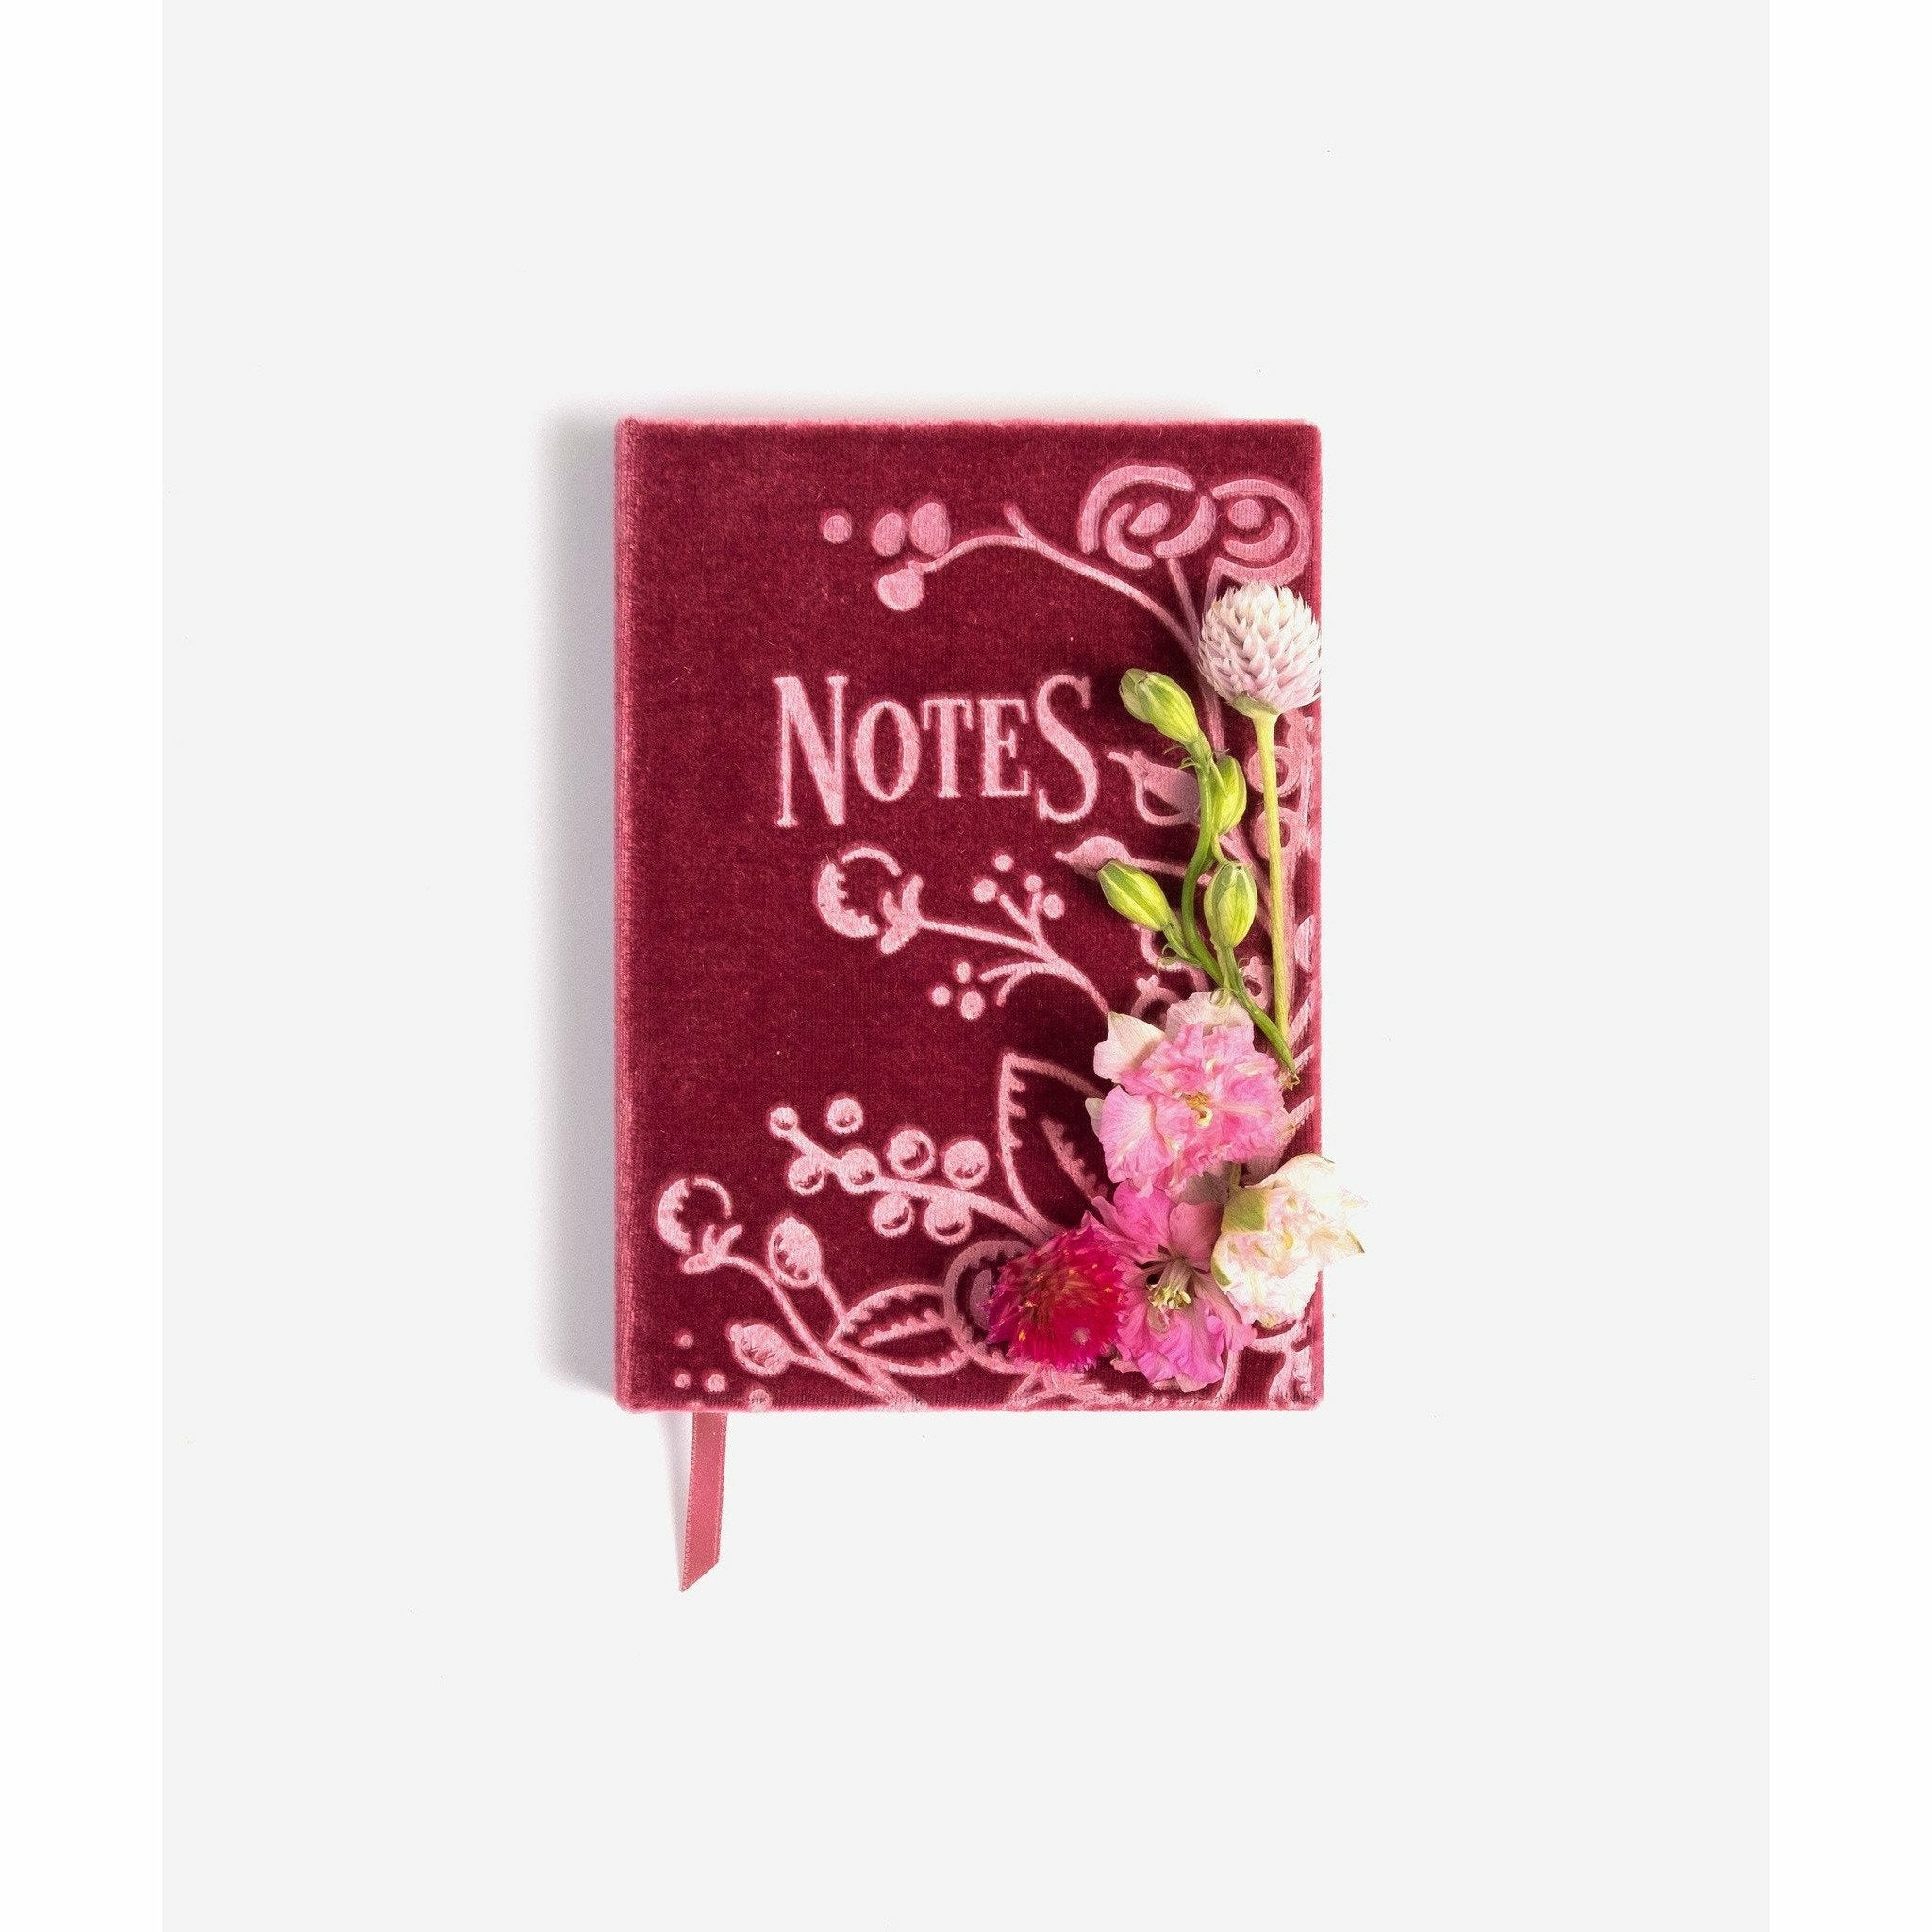 Notes Soft Velvet-Covered Note book with Lined Pages - The First Snow